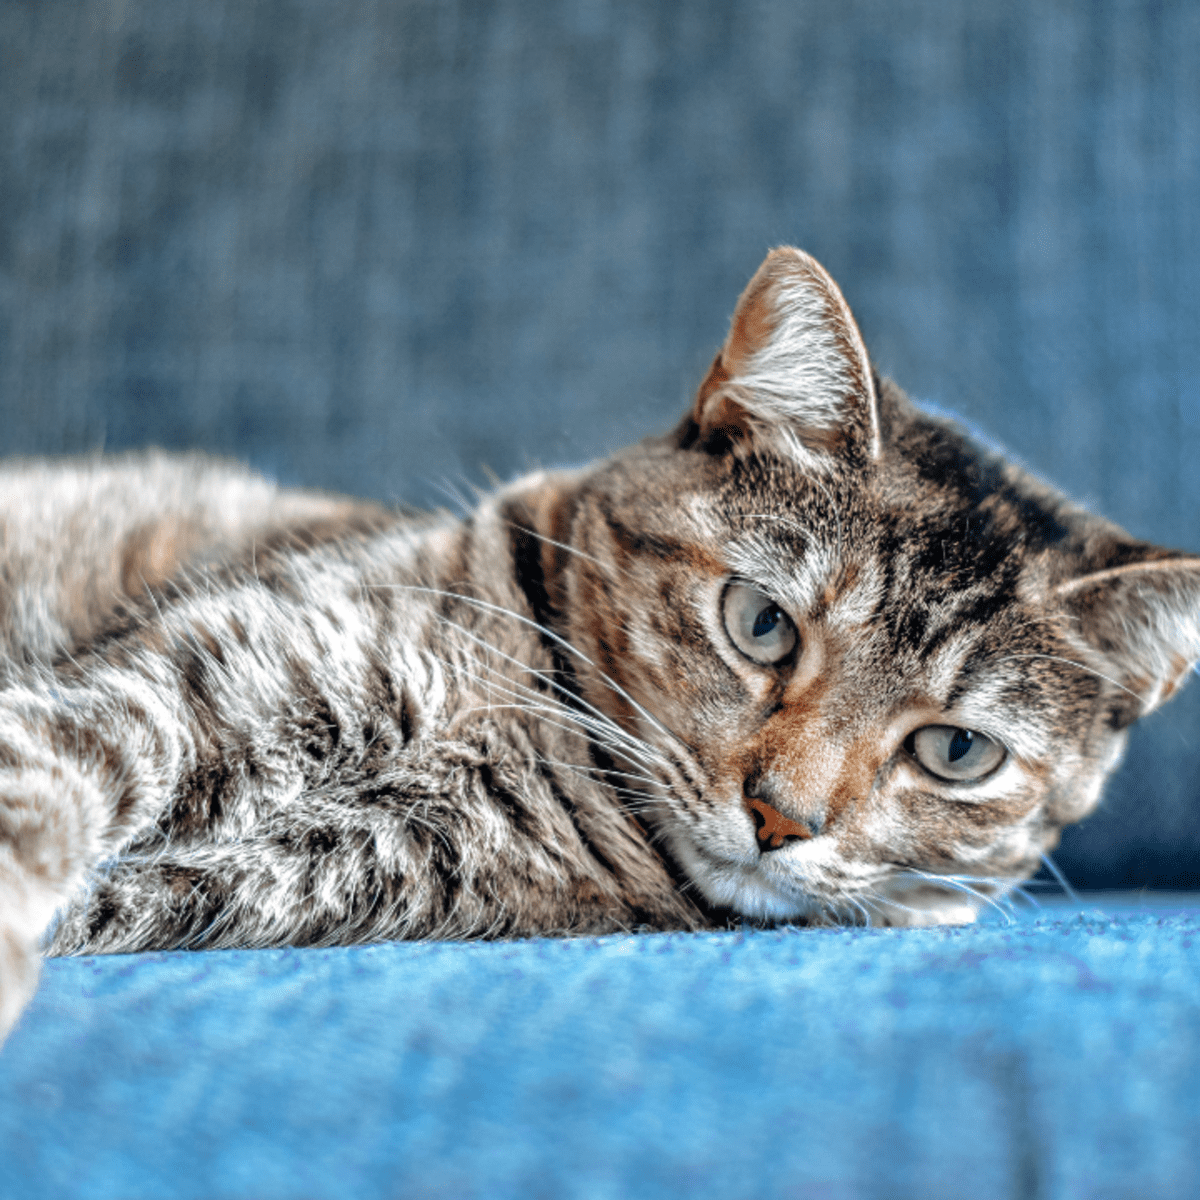 15 Reasons Not To Have A Pet Cat - Pethelpful